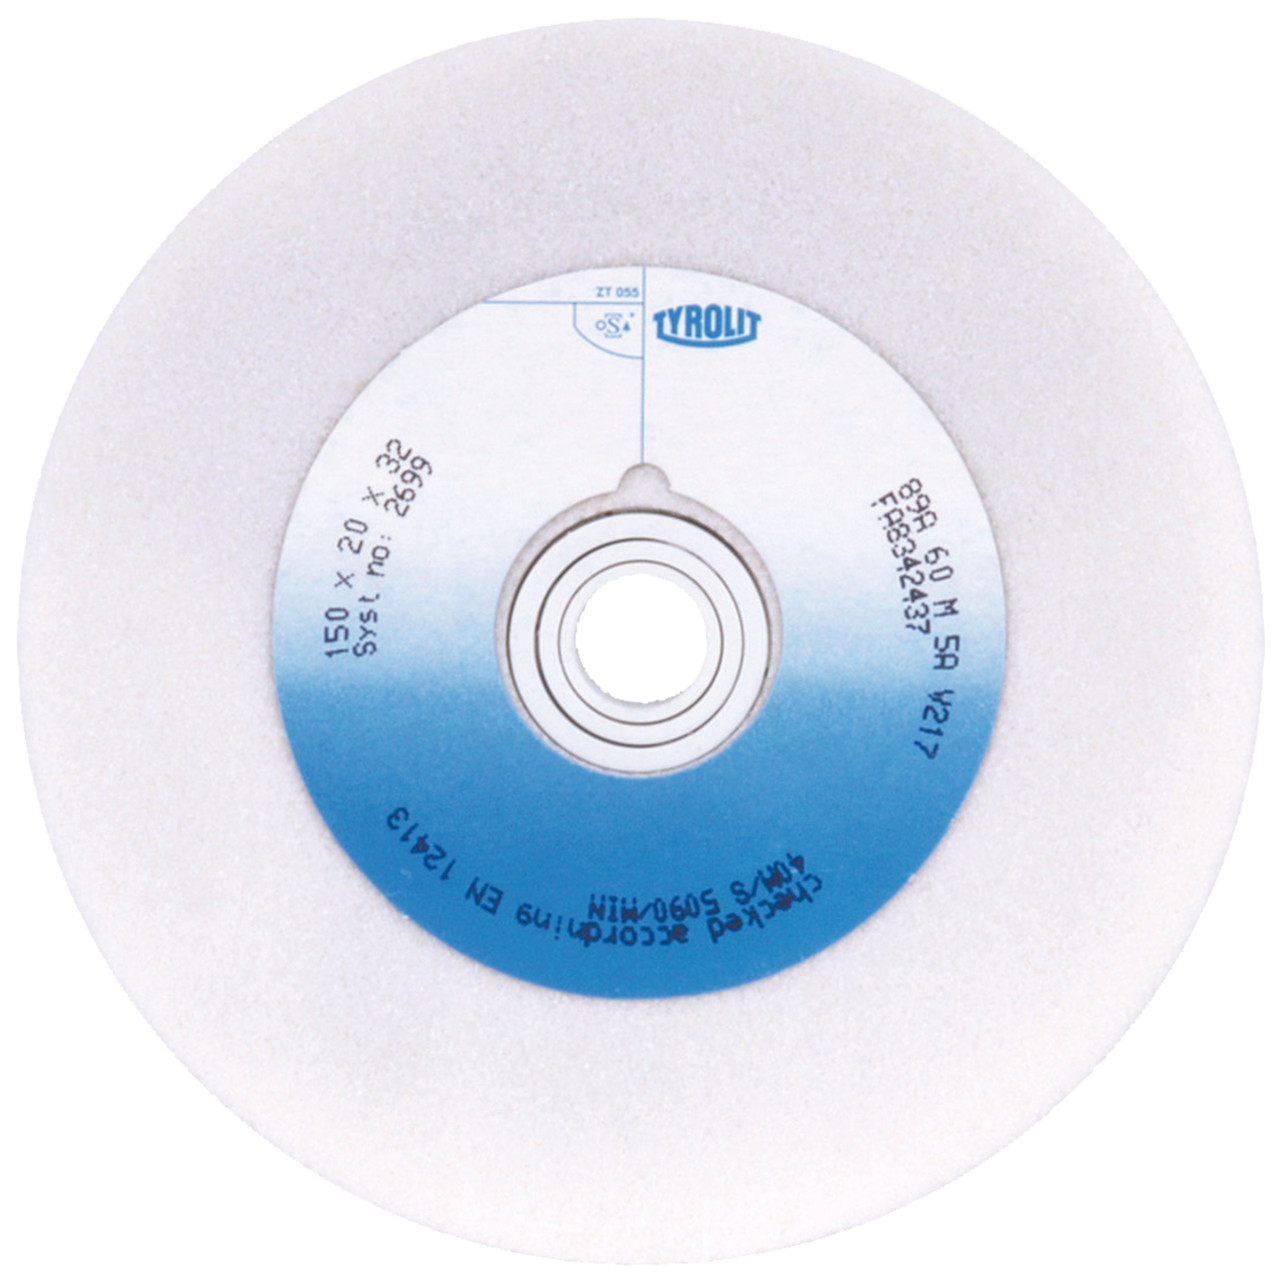 Tyrolit Conventional ceramic grinding discs DxDxH 300x40x76 For high-alloy steels and HSS, shape: 1, Art. 30840